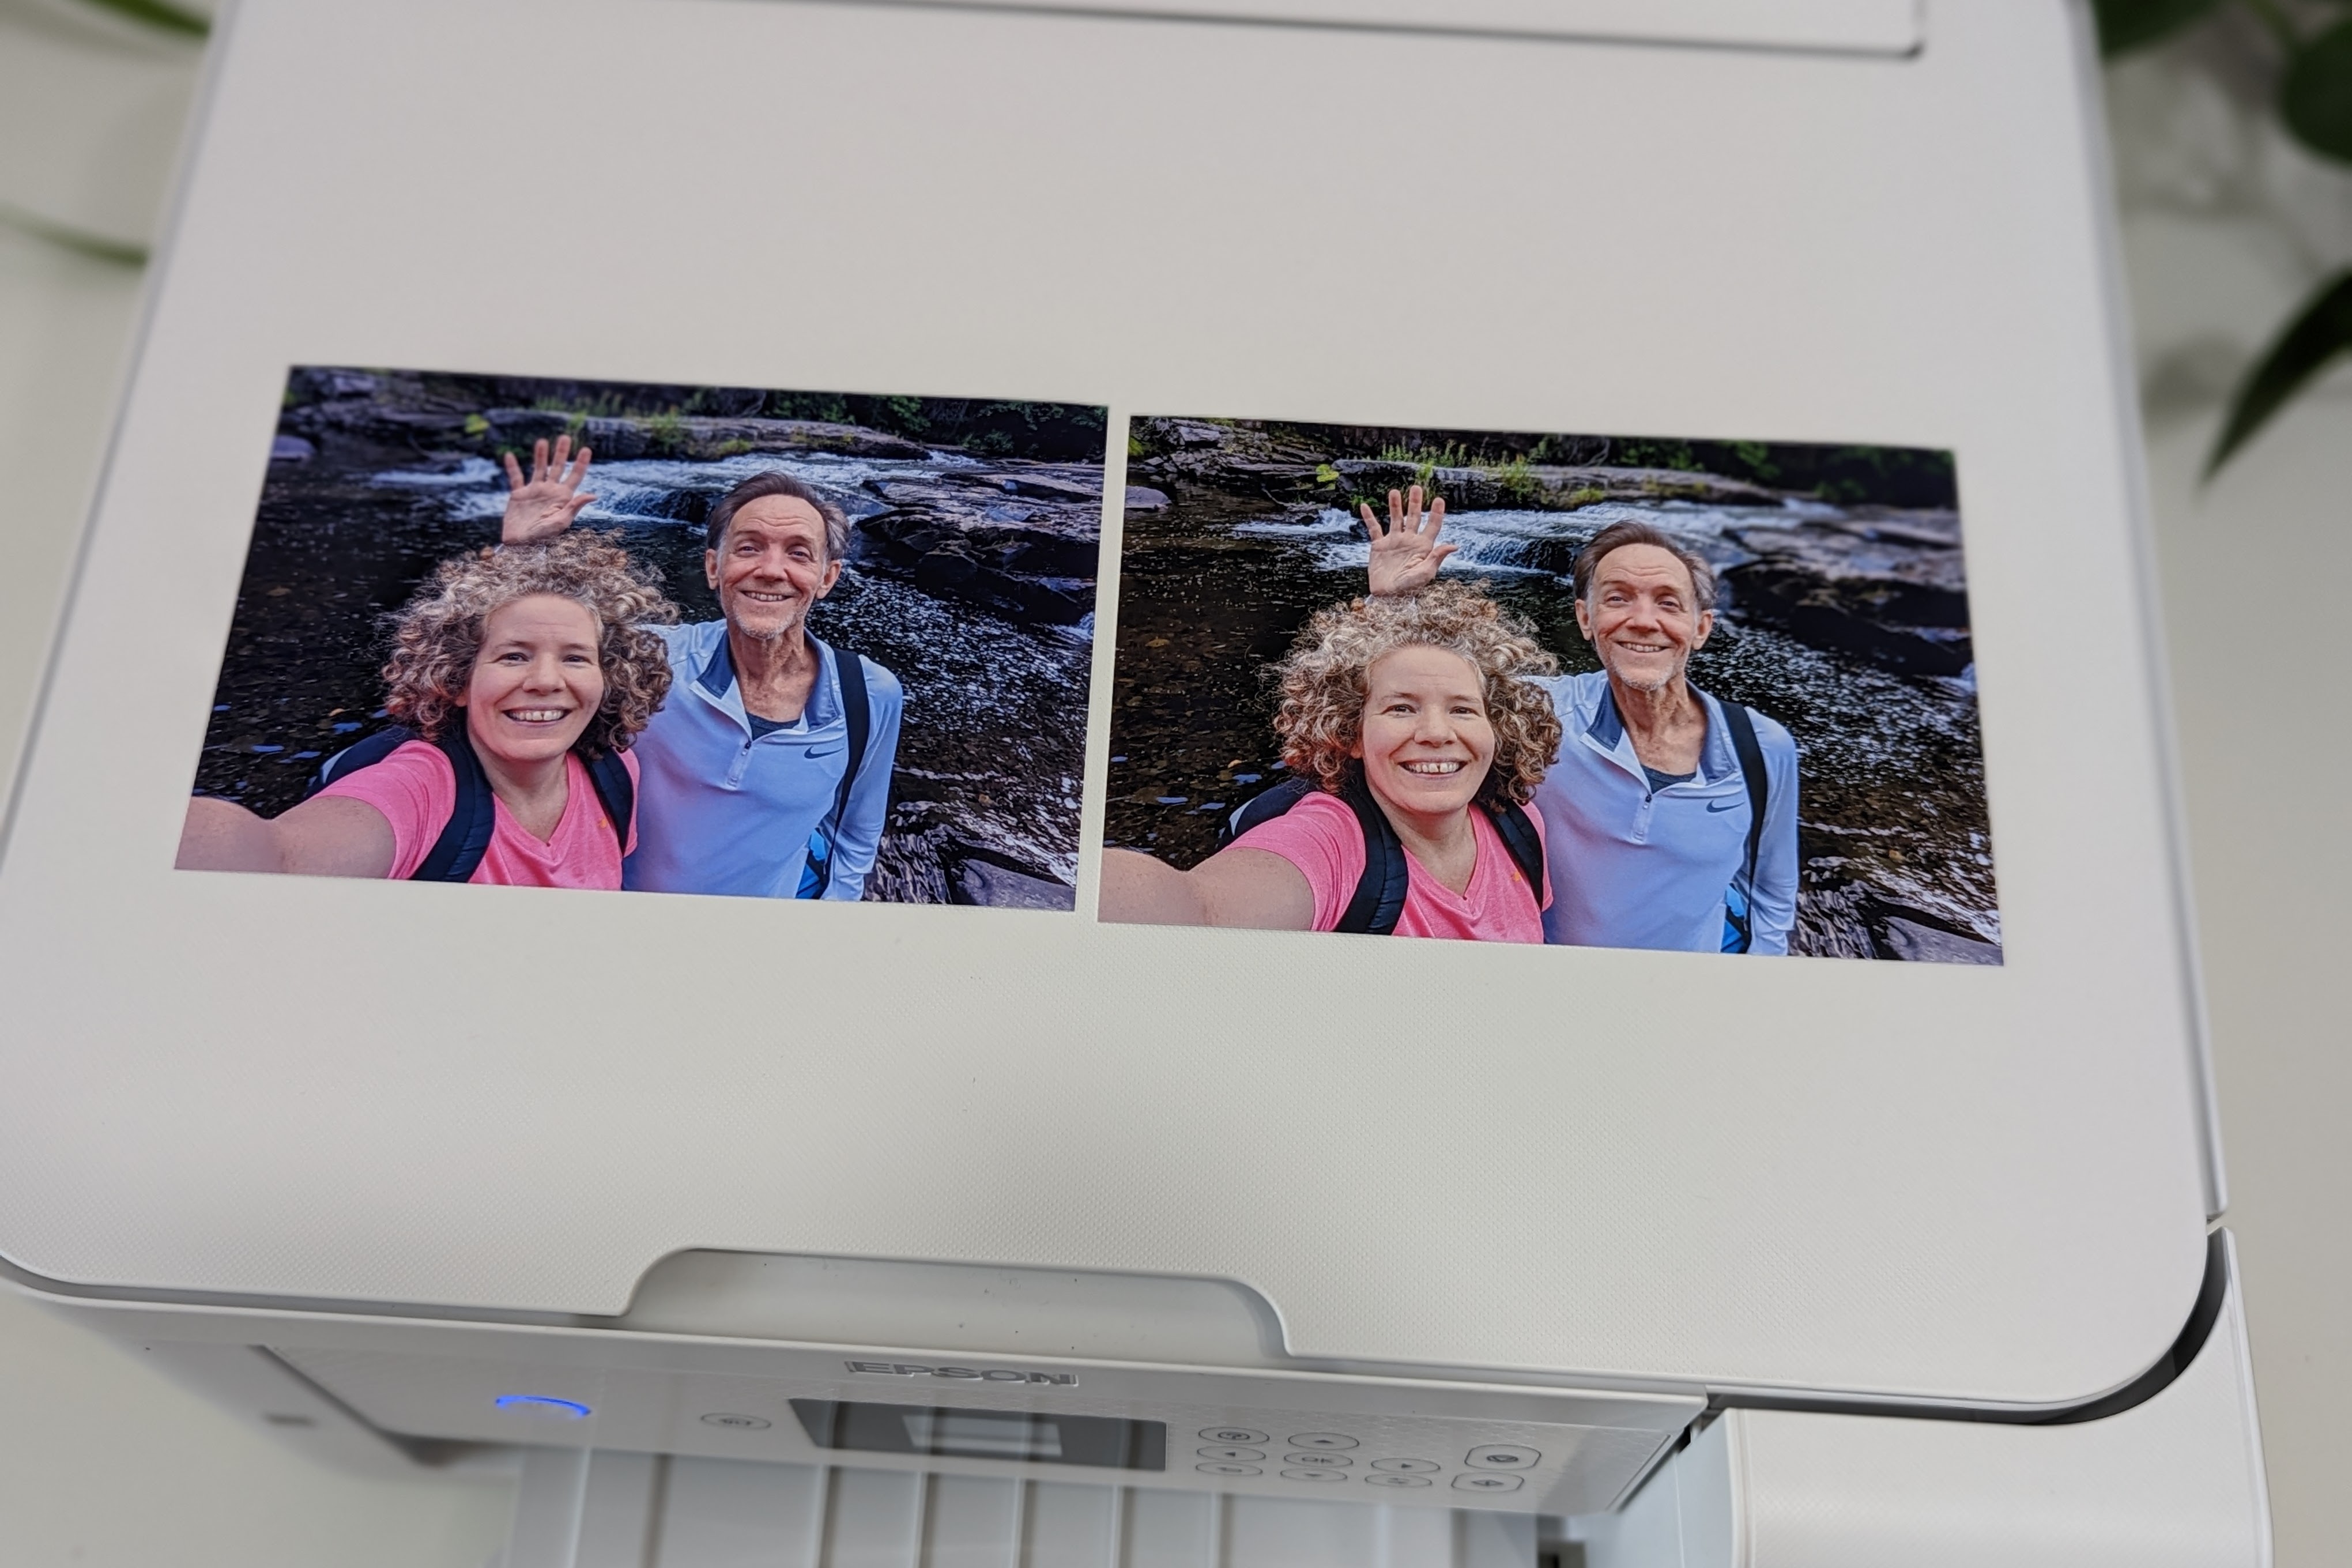 The Epson EcoTank ET-2850 has great photo print quality, but watch out for blue tints